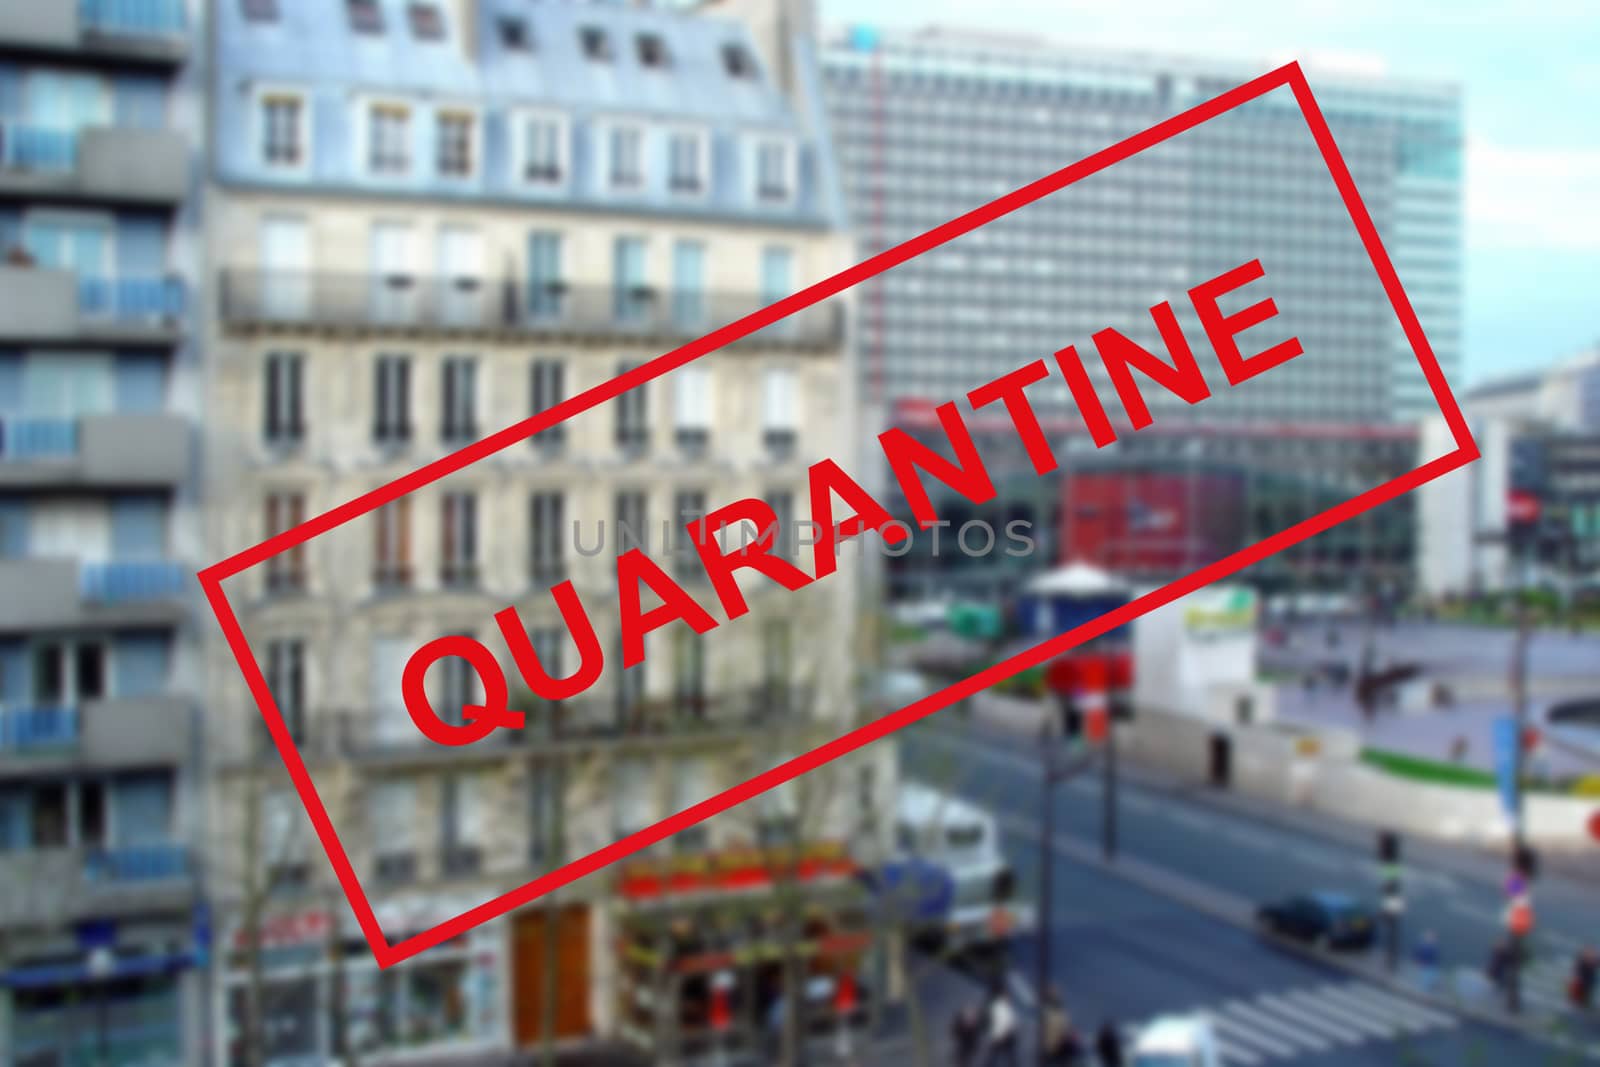 COVID-19 coronavirus in France, text quarantine on a blurry background of a train station building in Paris. The concept of covid pandemics and travel in Europe. Travel is banned due to the coronavirus pandemic around the world